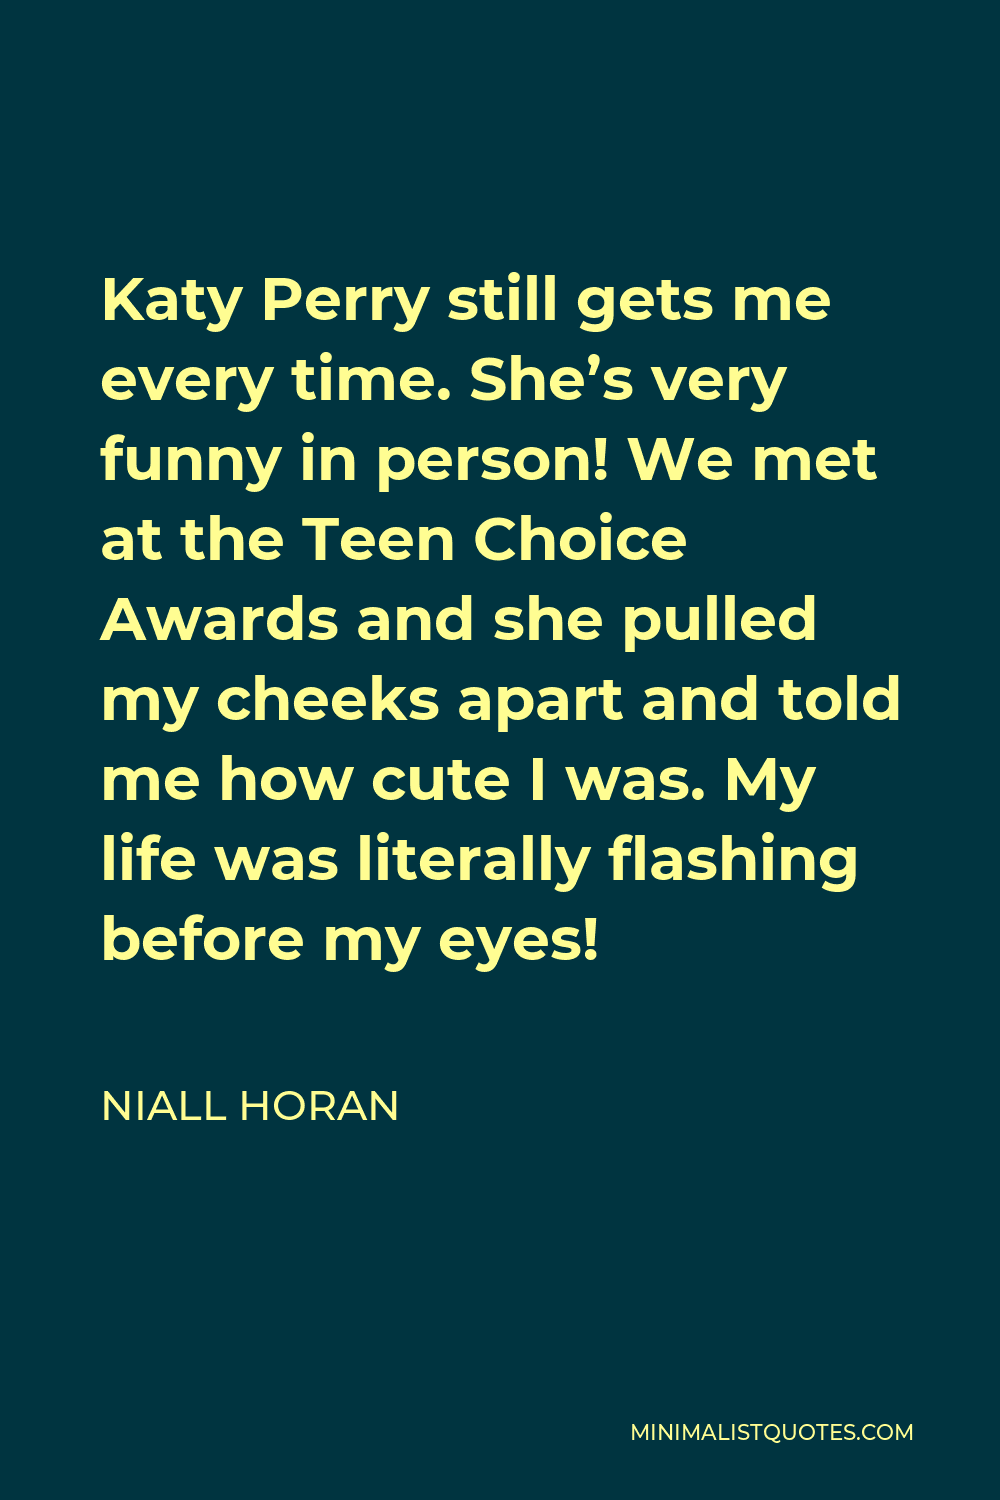 Niall Horan Quote - Katy Perry still gets me every time. She’s very funny in person! We met at the Teen Choice Awards and she pulled my cheeks apart and told me how cute I was. My life was literally flashing before my eyes!